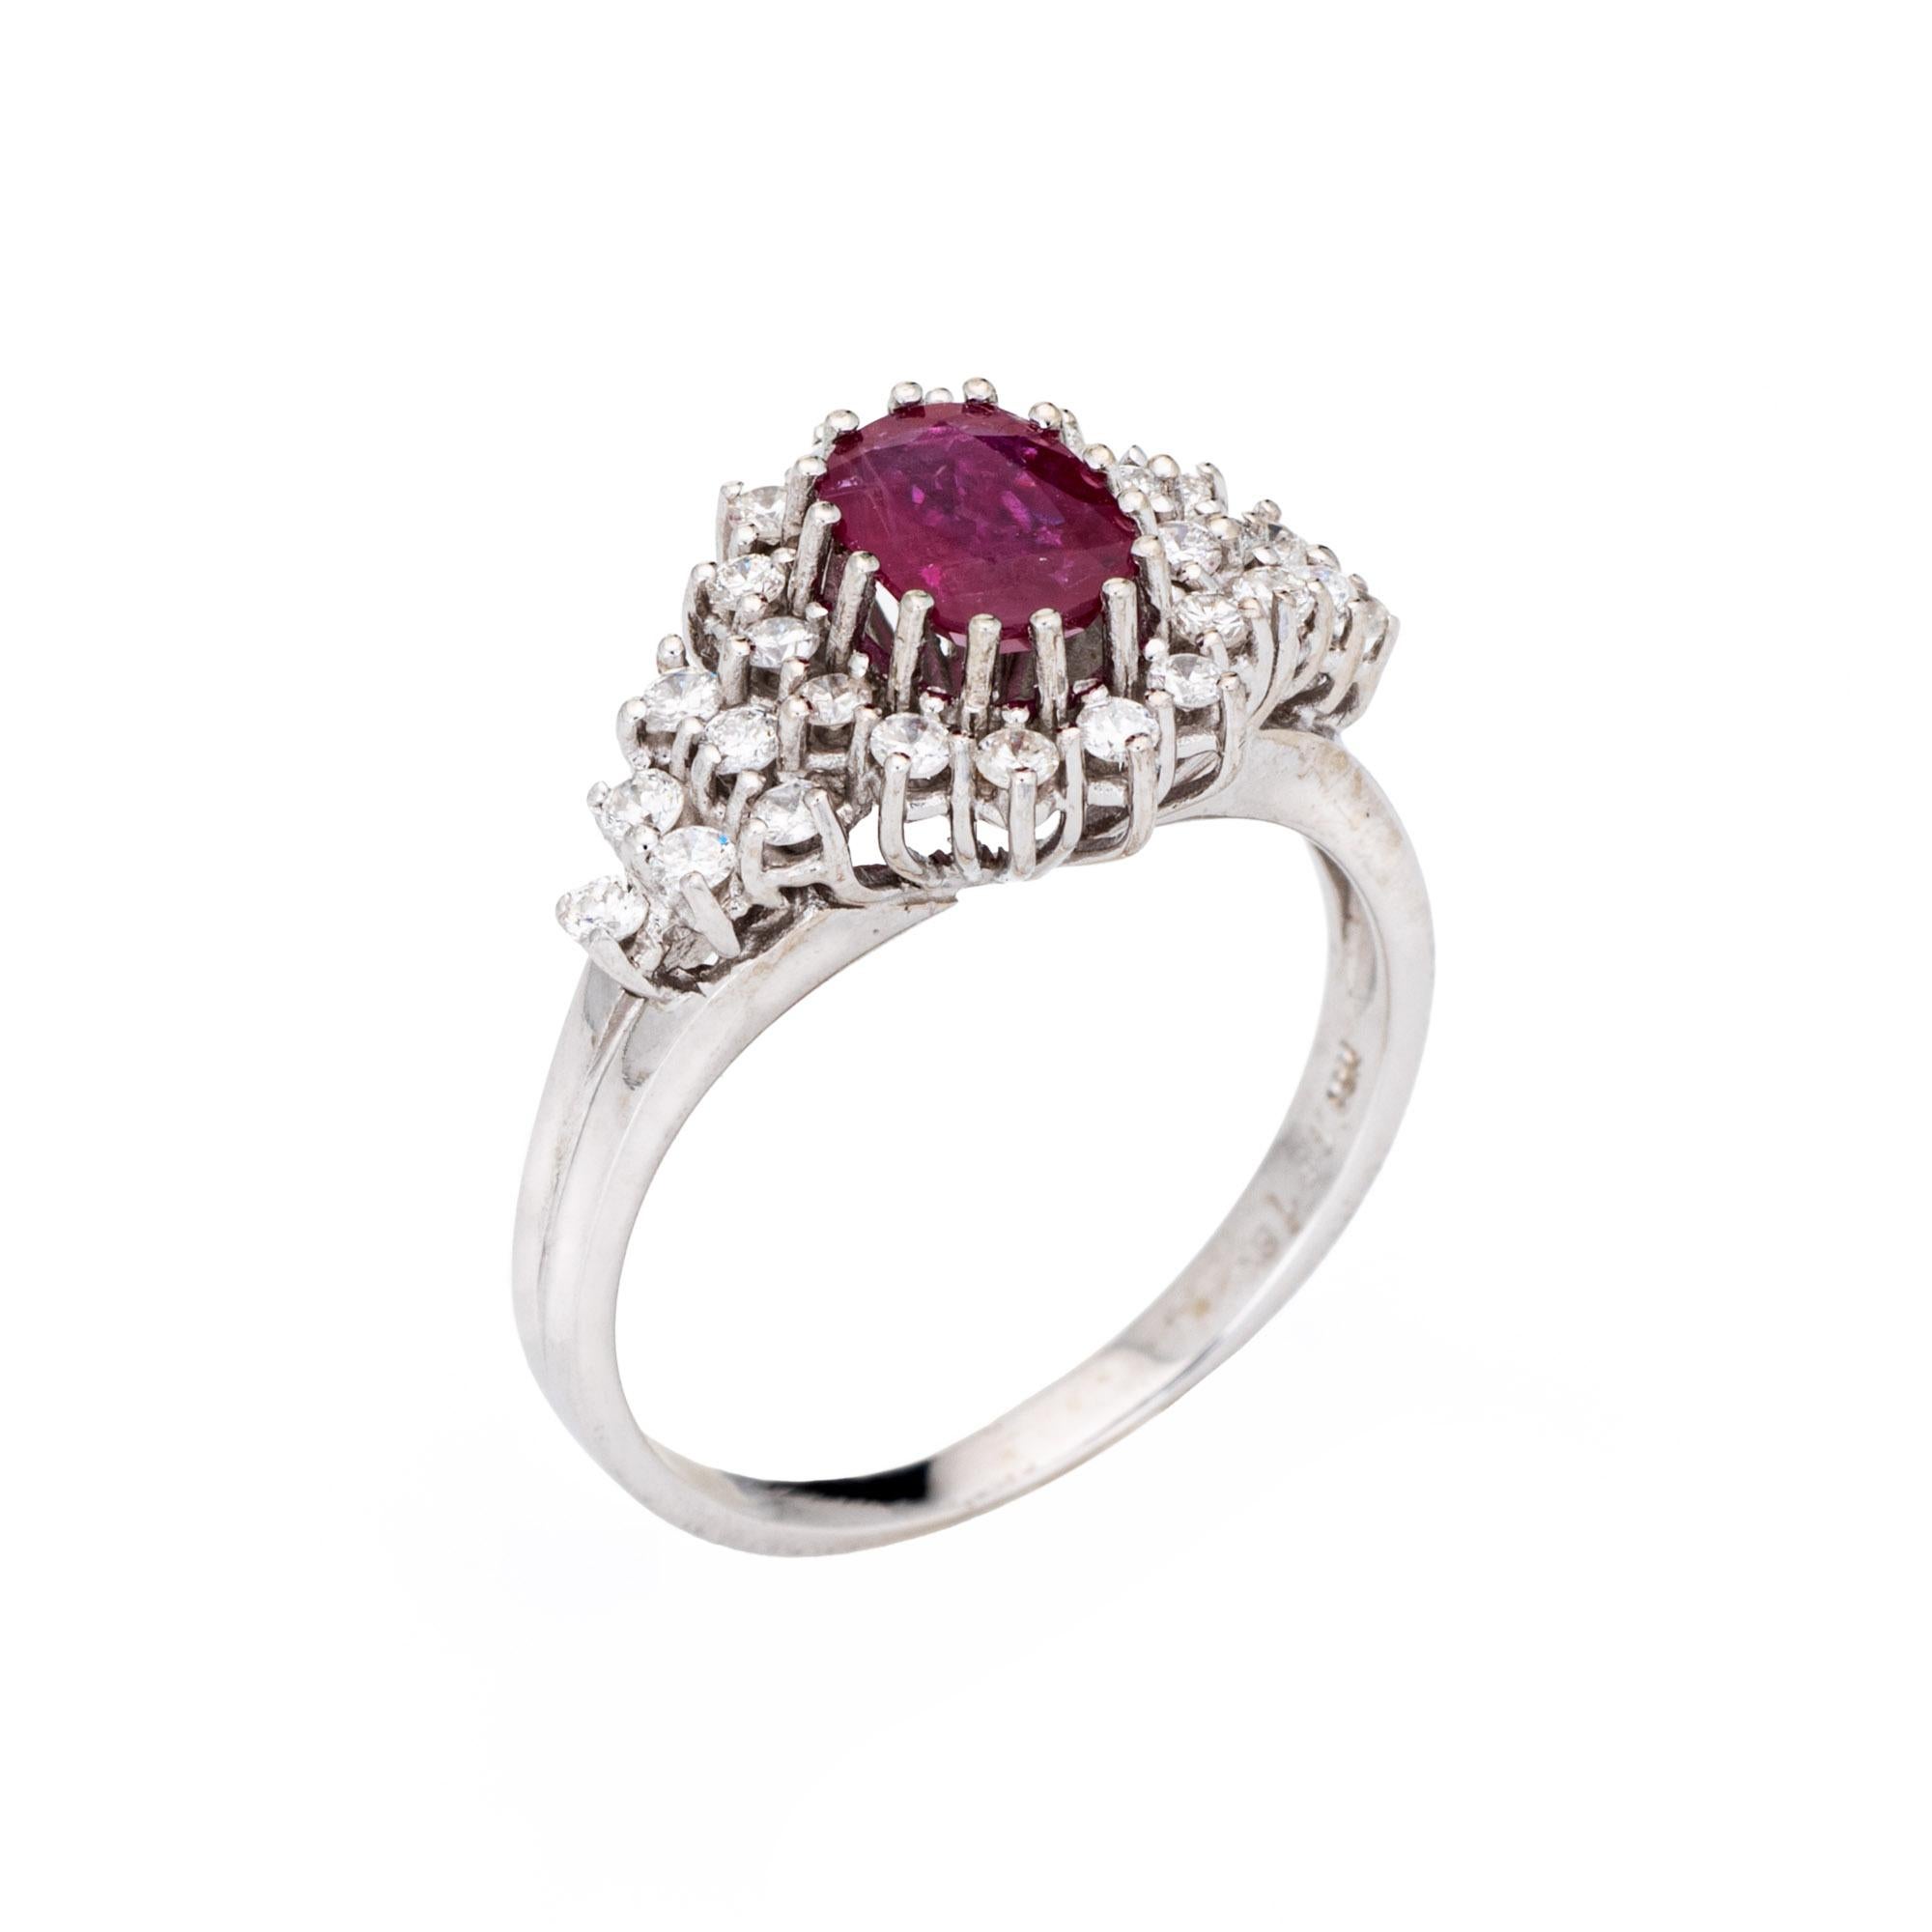 Stylish ruby & diamond cocktail ring crafted in 14 karat white gold. 

Oval faceted ruby measures 8mm x 6mm (estimated at 2 carats), accented with an estimated 0.50 carats of diamonds (estimated at H-I color and VS2-SI2 clarity). The ruby is in very